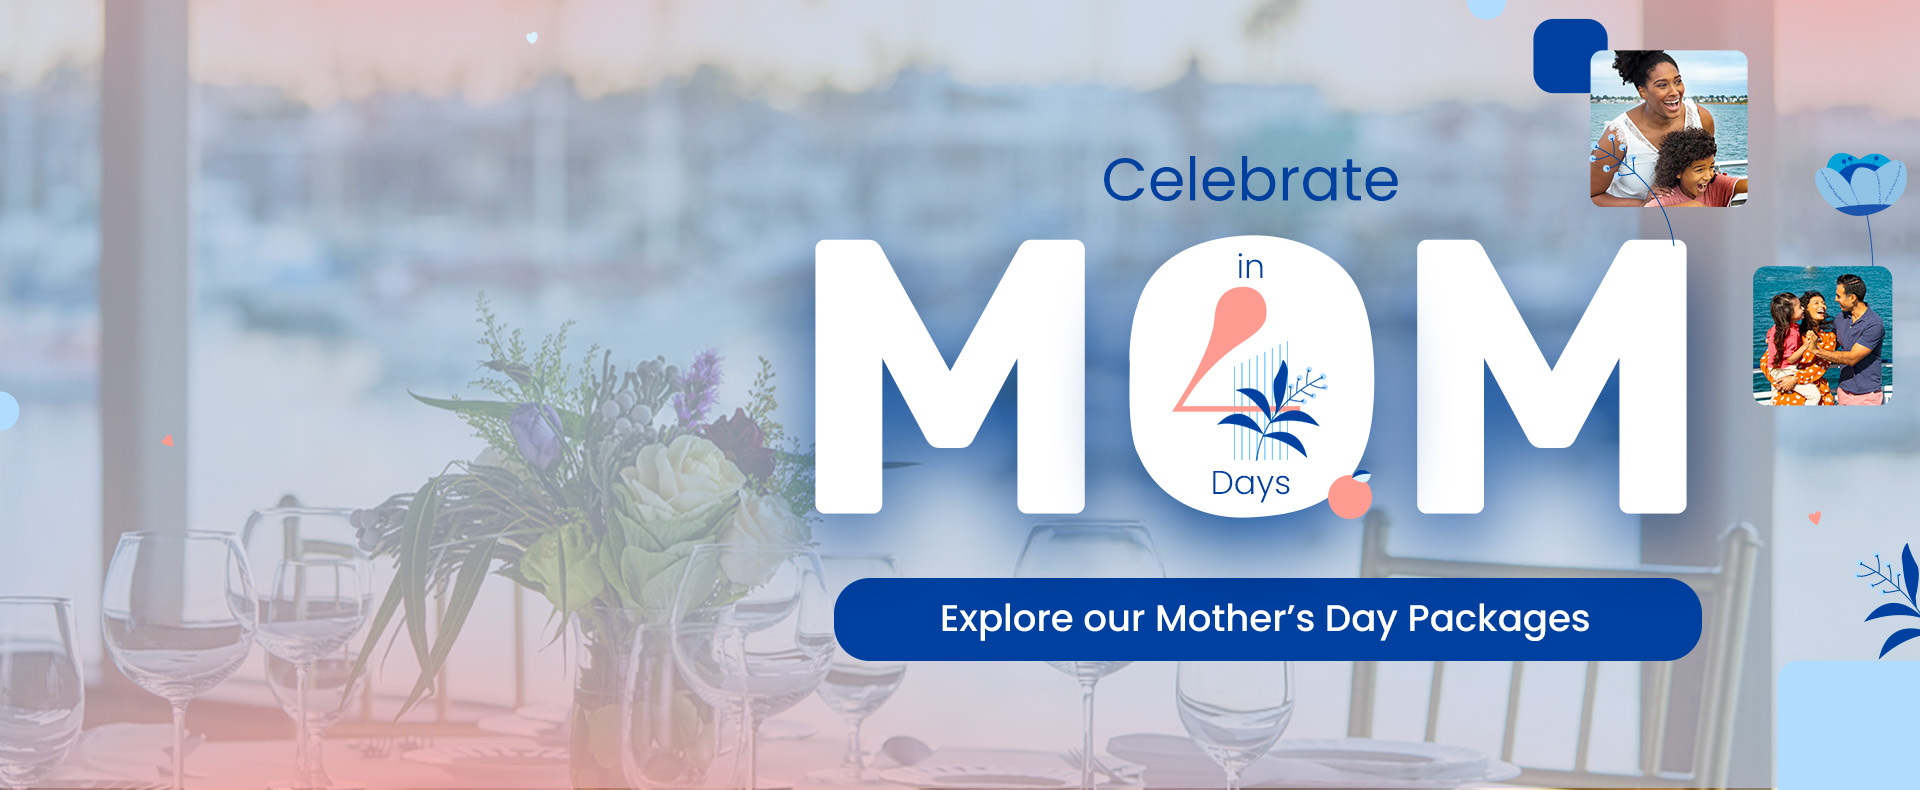 Mother’s Day countdown 4 days away